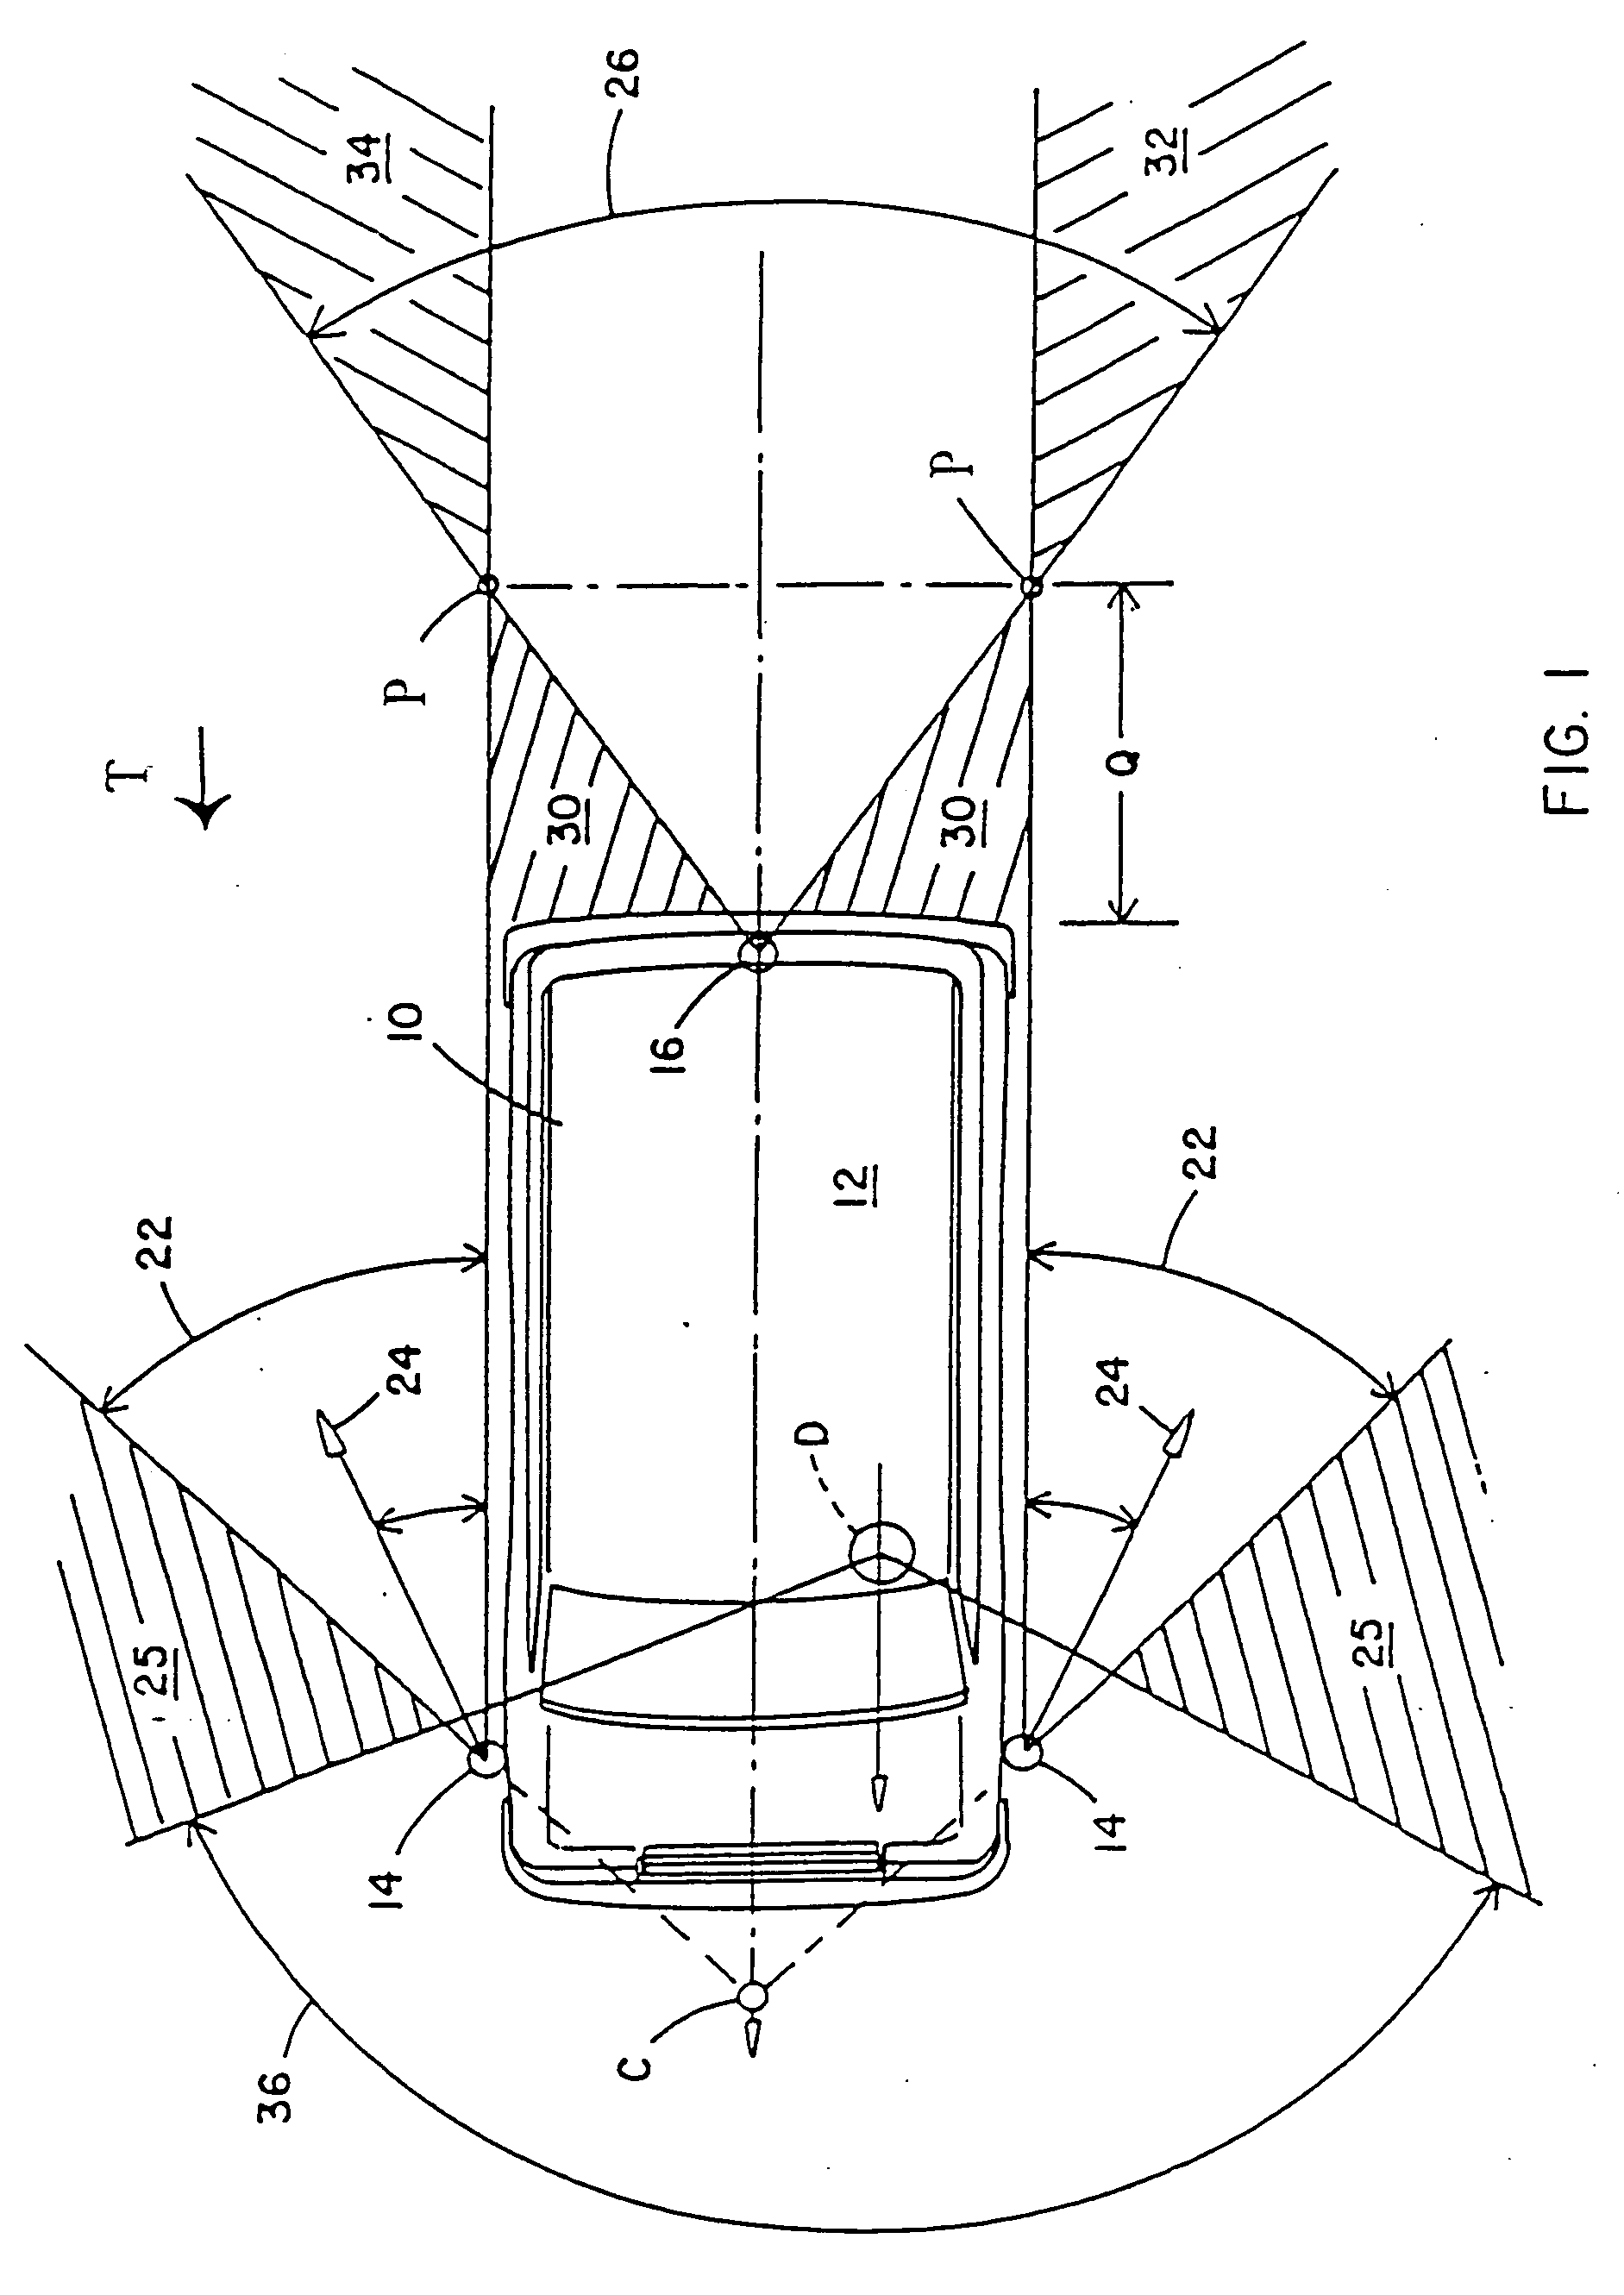 Image sensing system for a vehicle